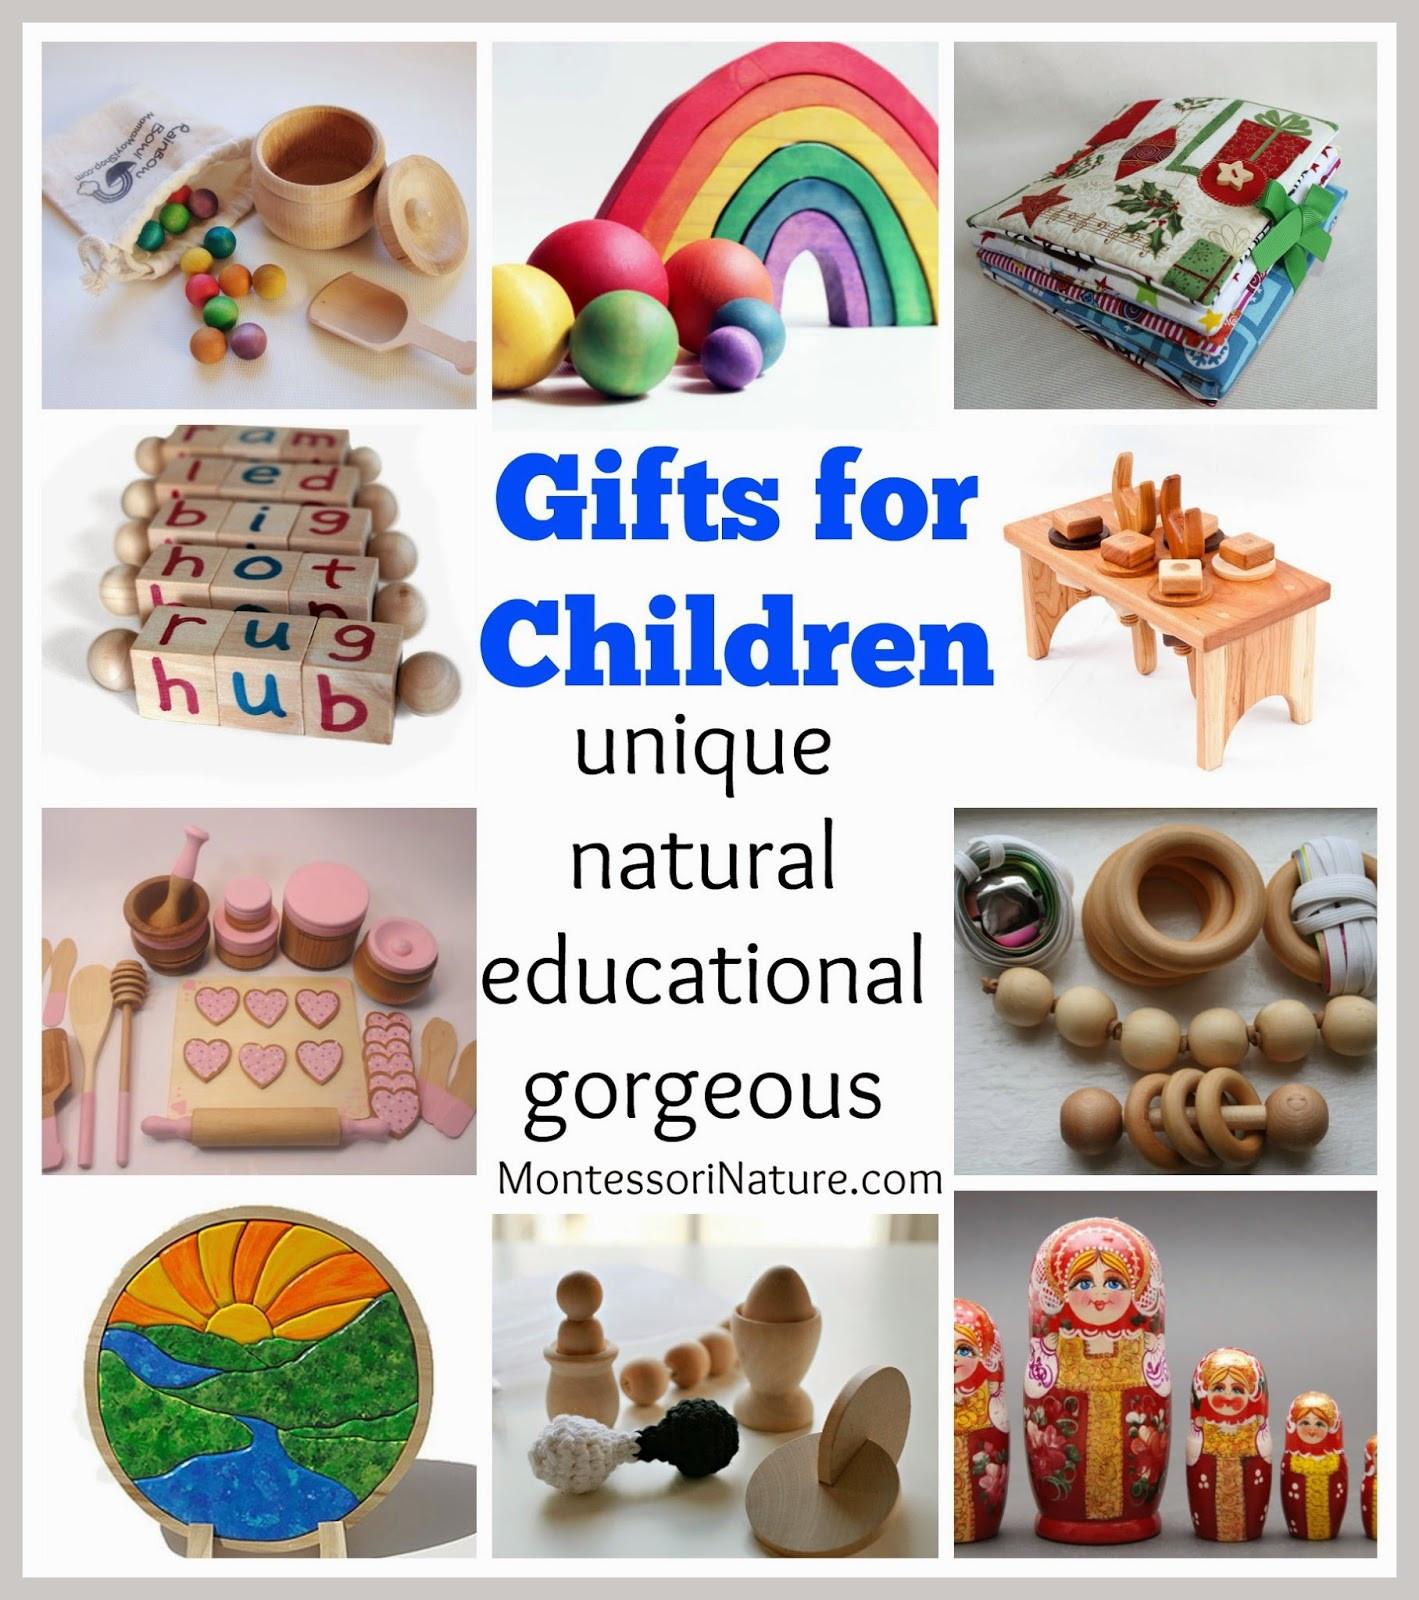 Fun Gifts For Kids
 Gifts for Children Unique Natural Educational Gorgeous